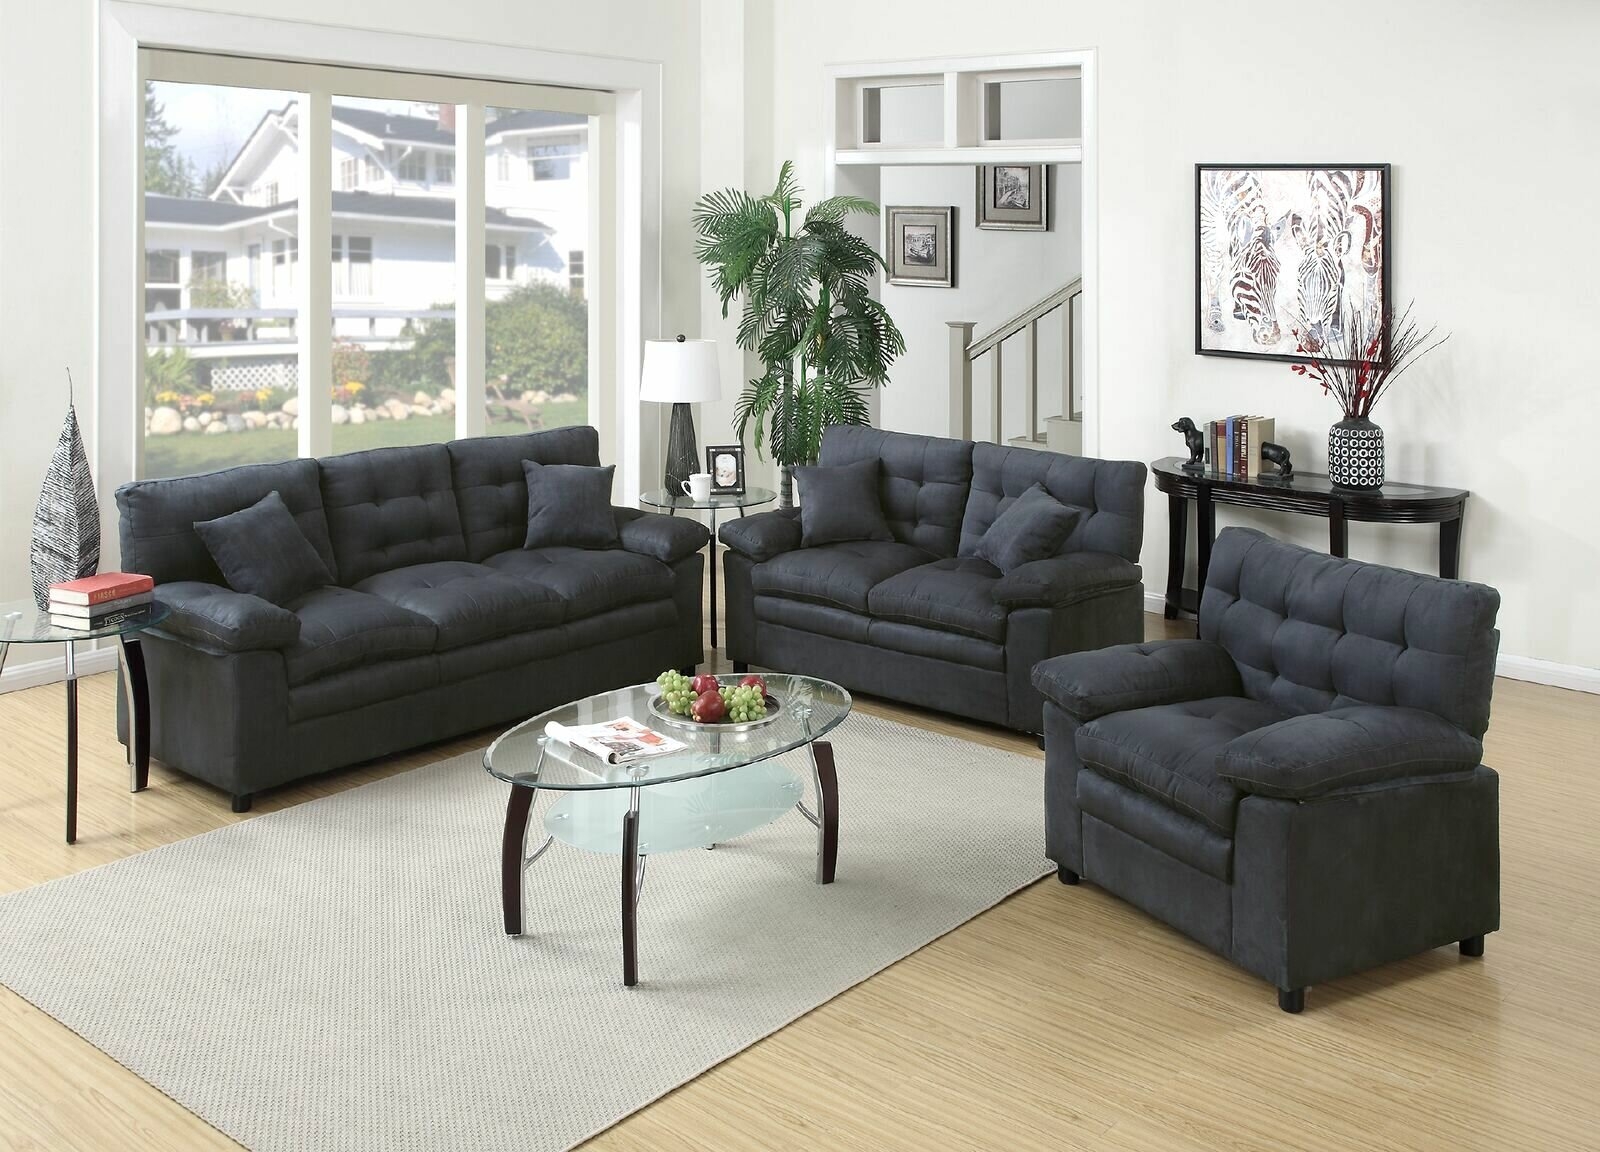 3 Piece Living Room Set You Ll Love In, Three Piece Living Room Set